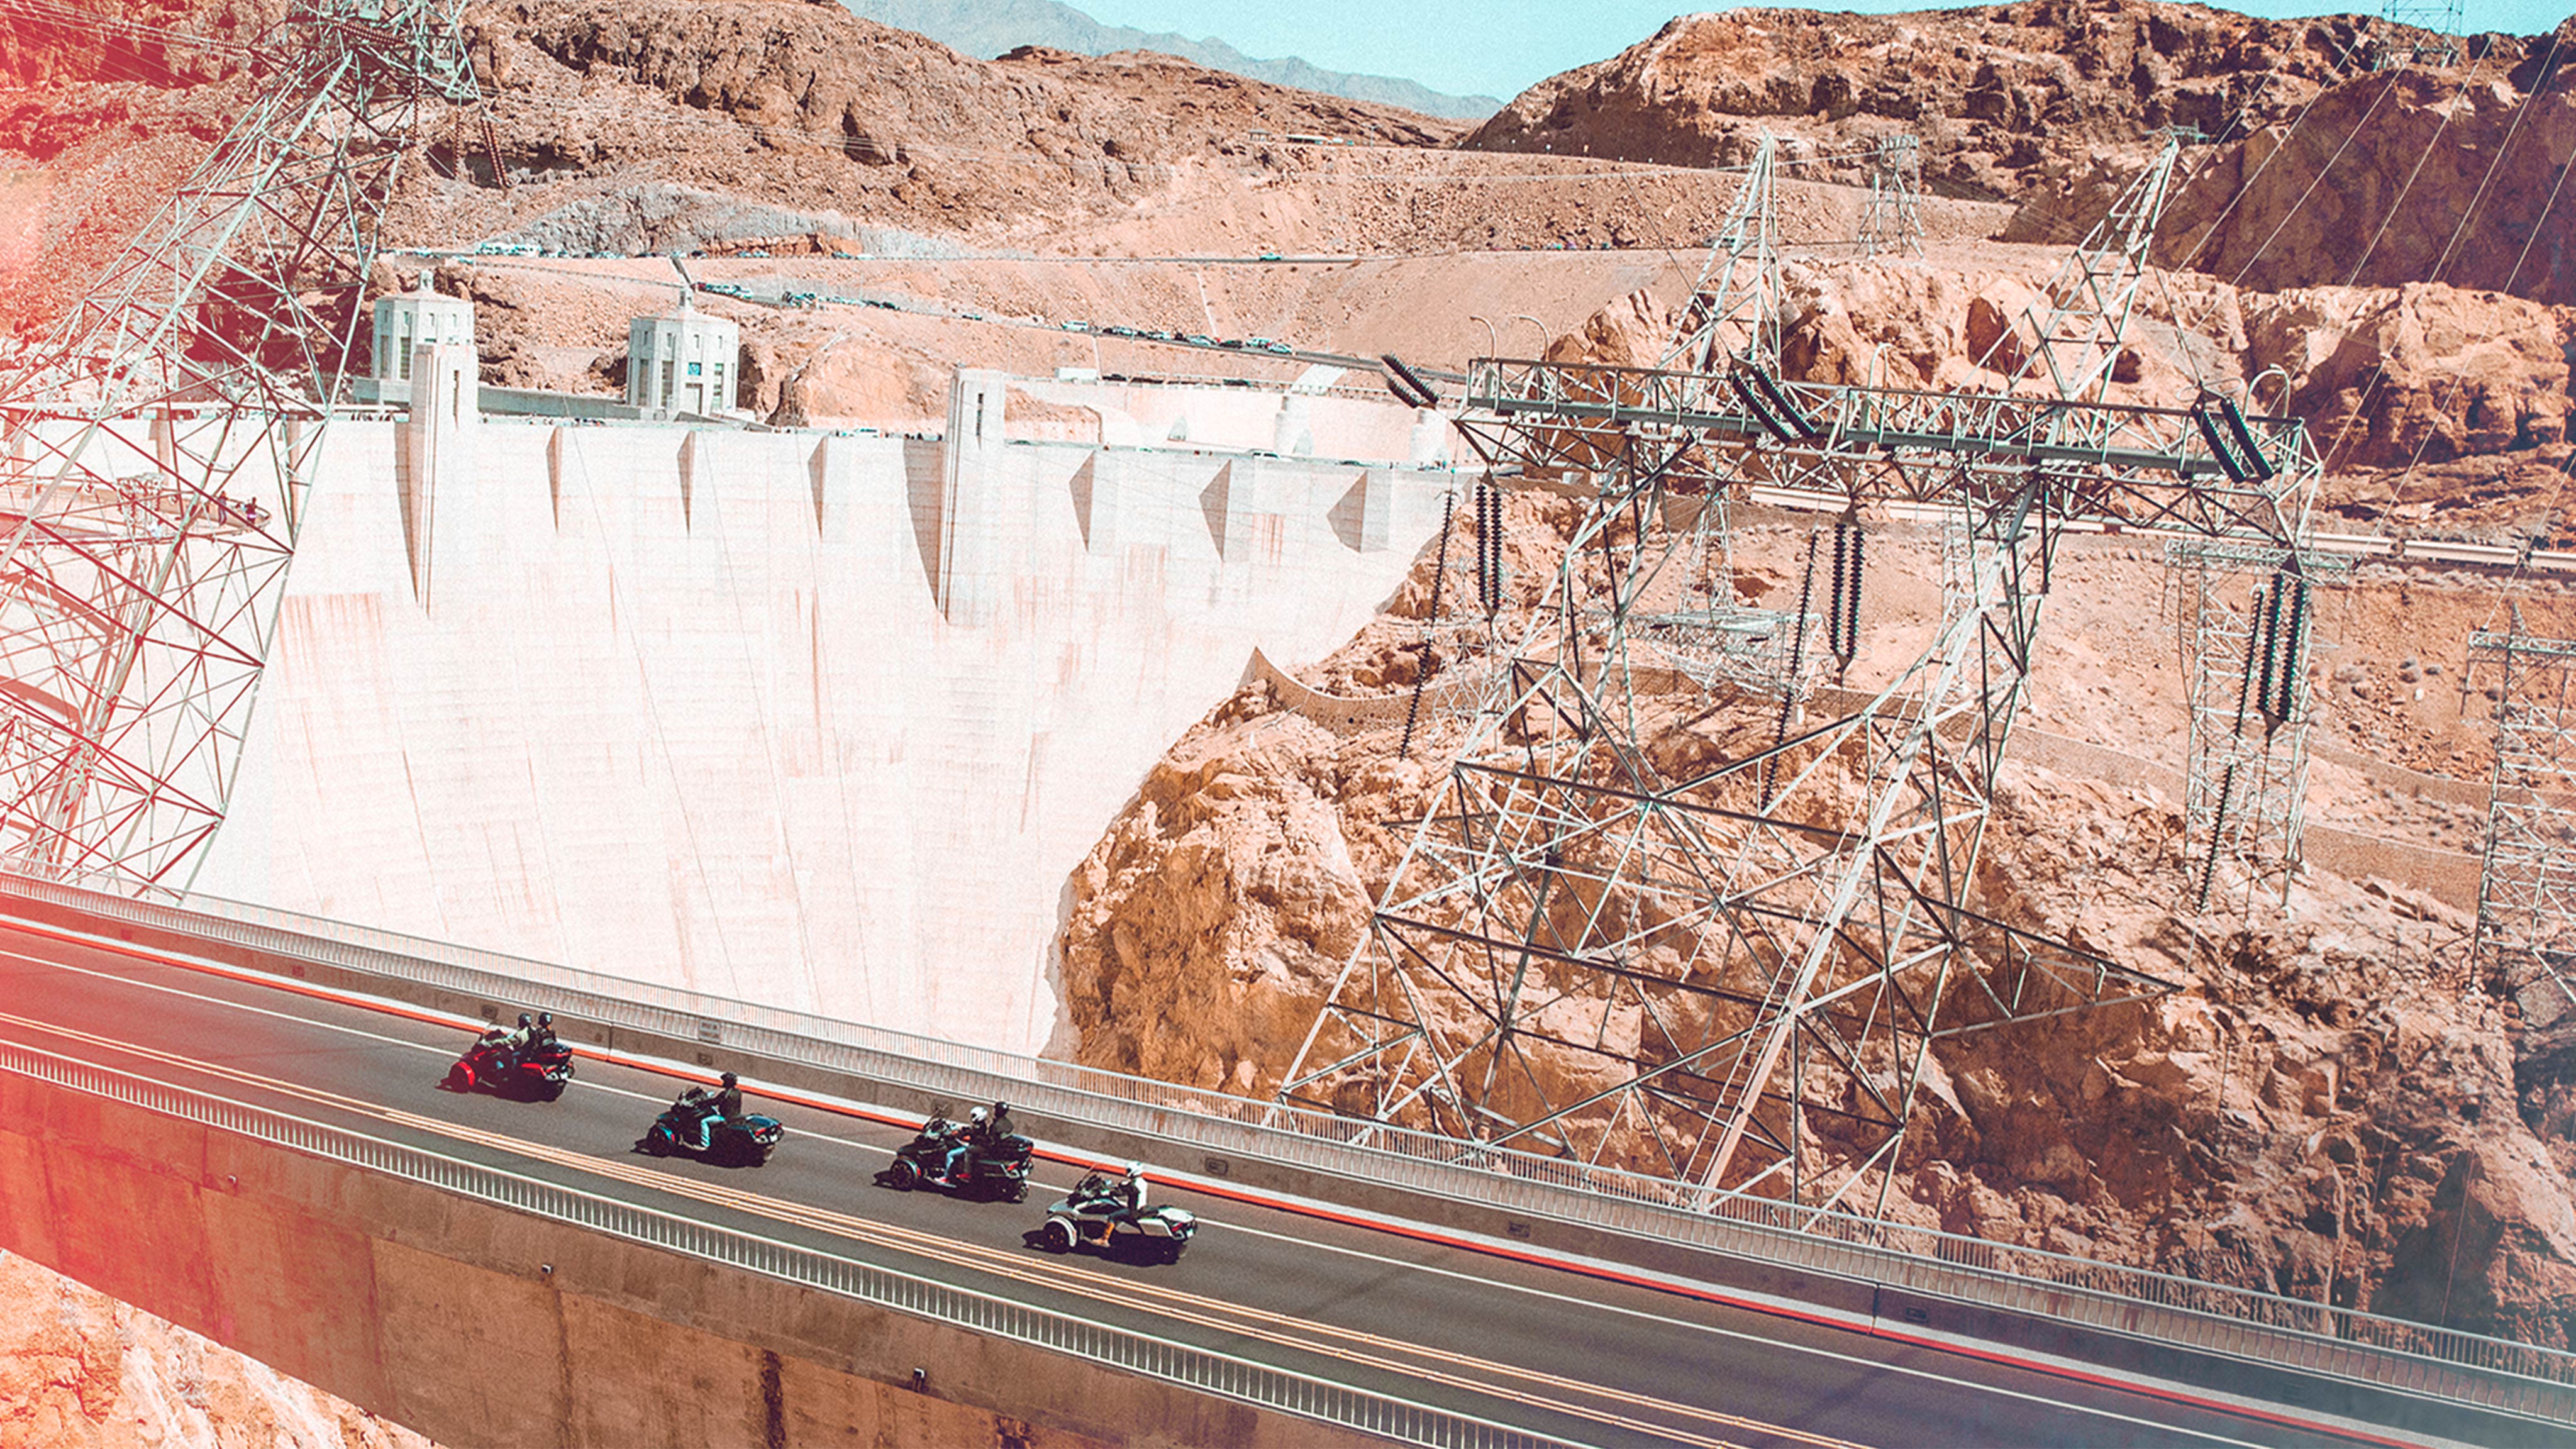 Group of On-Road riders riding near the Hoover Dam